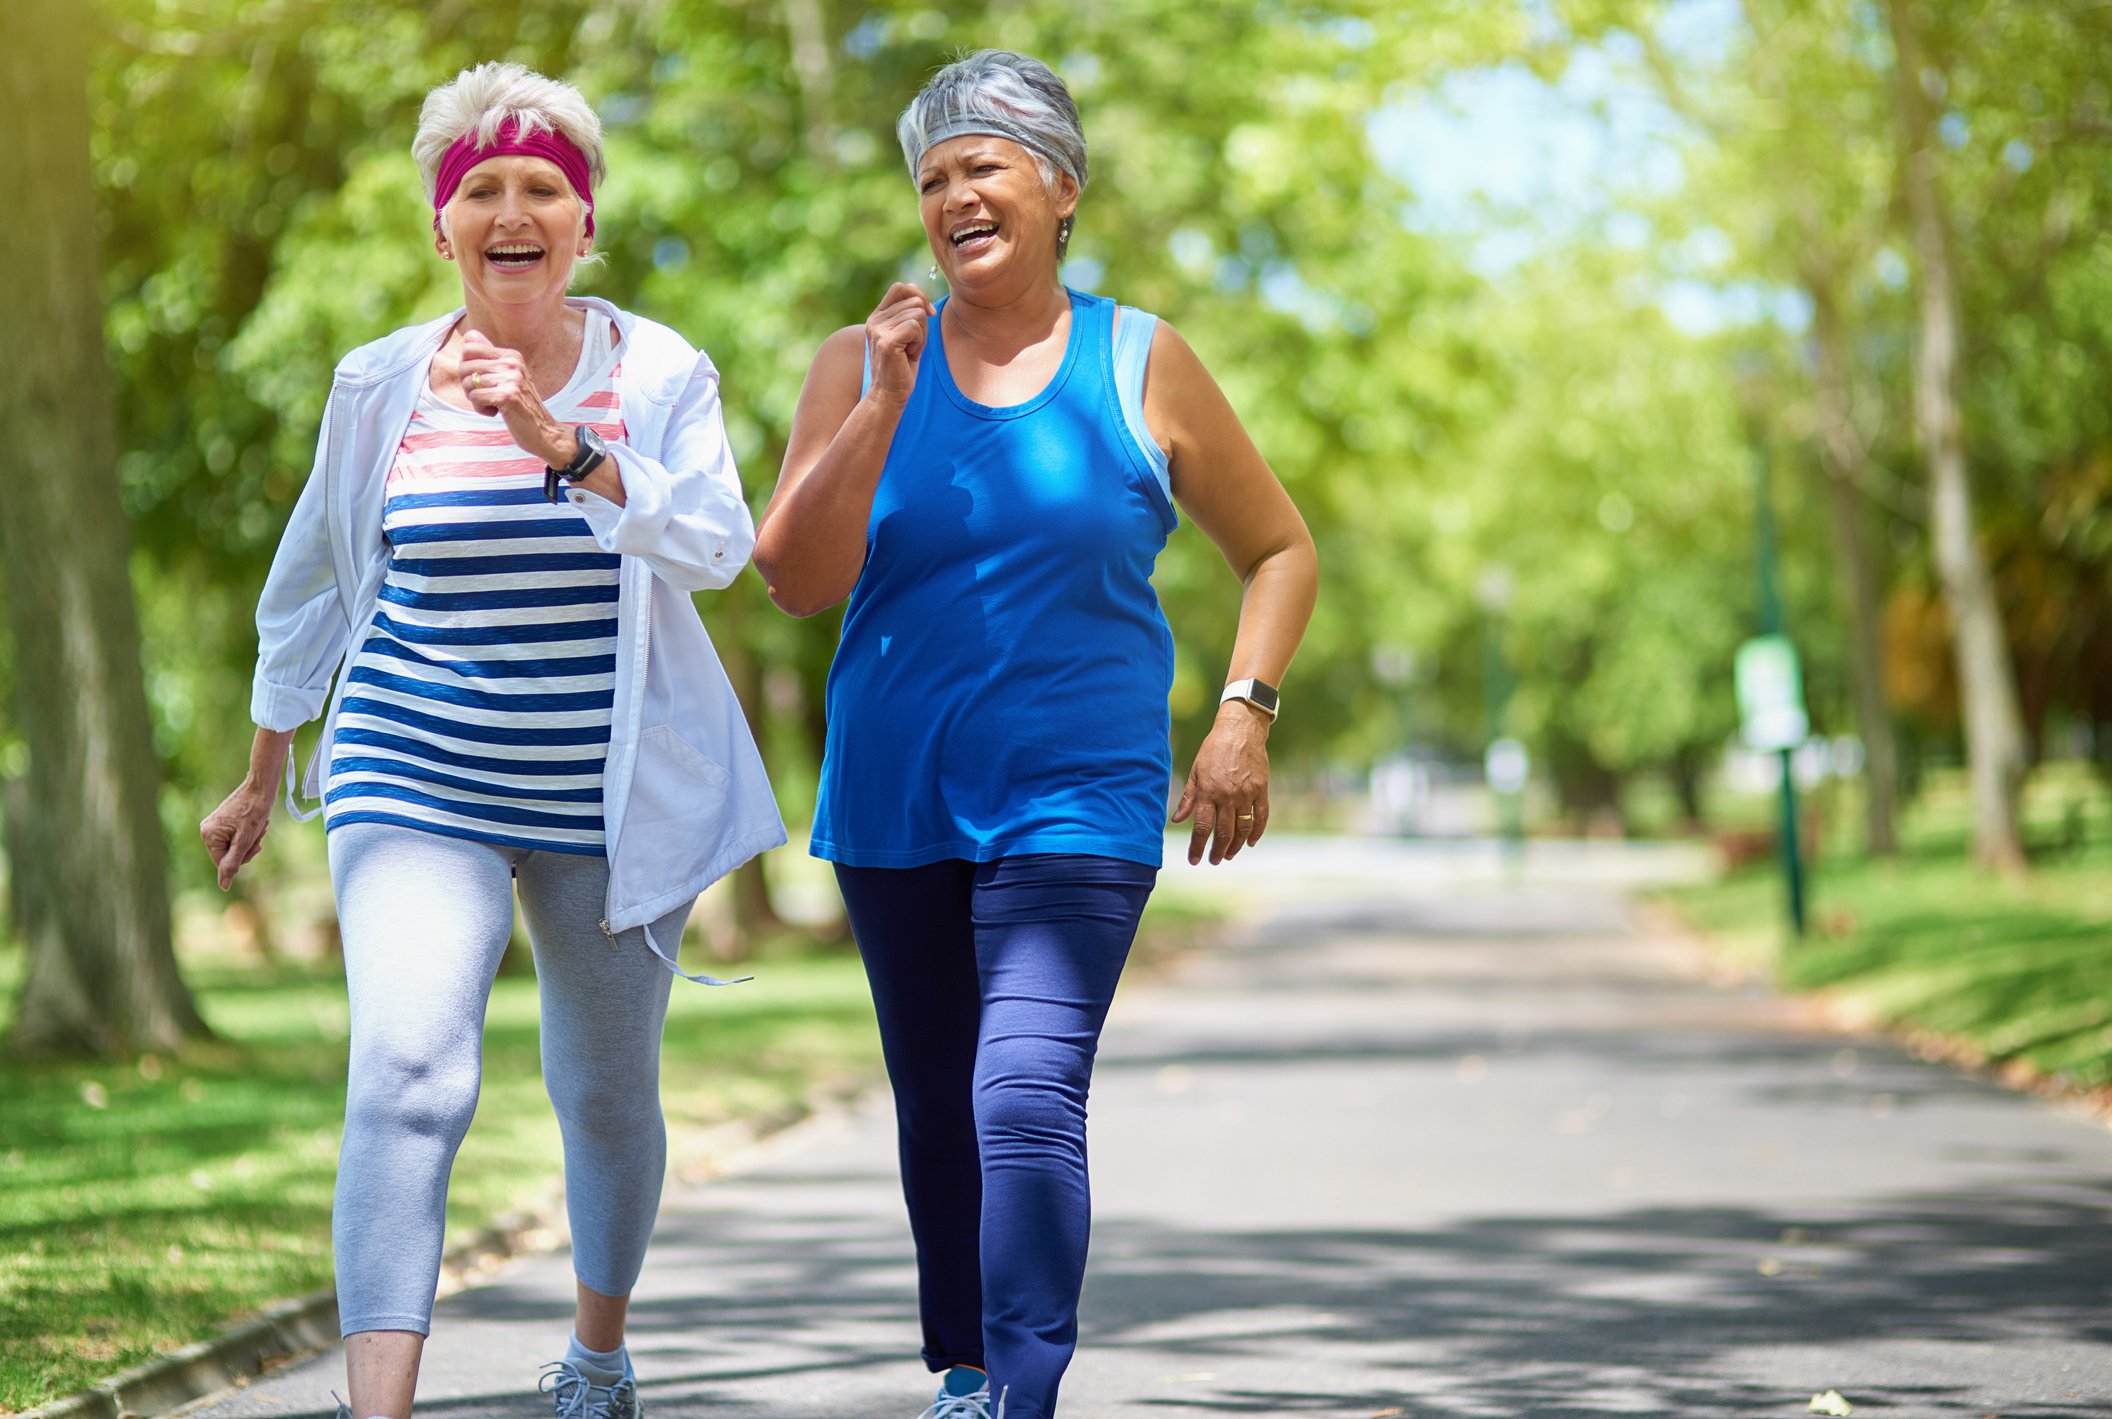 The Many Benefits of Walking for Seniors - Bethesda Health Group